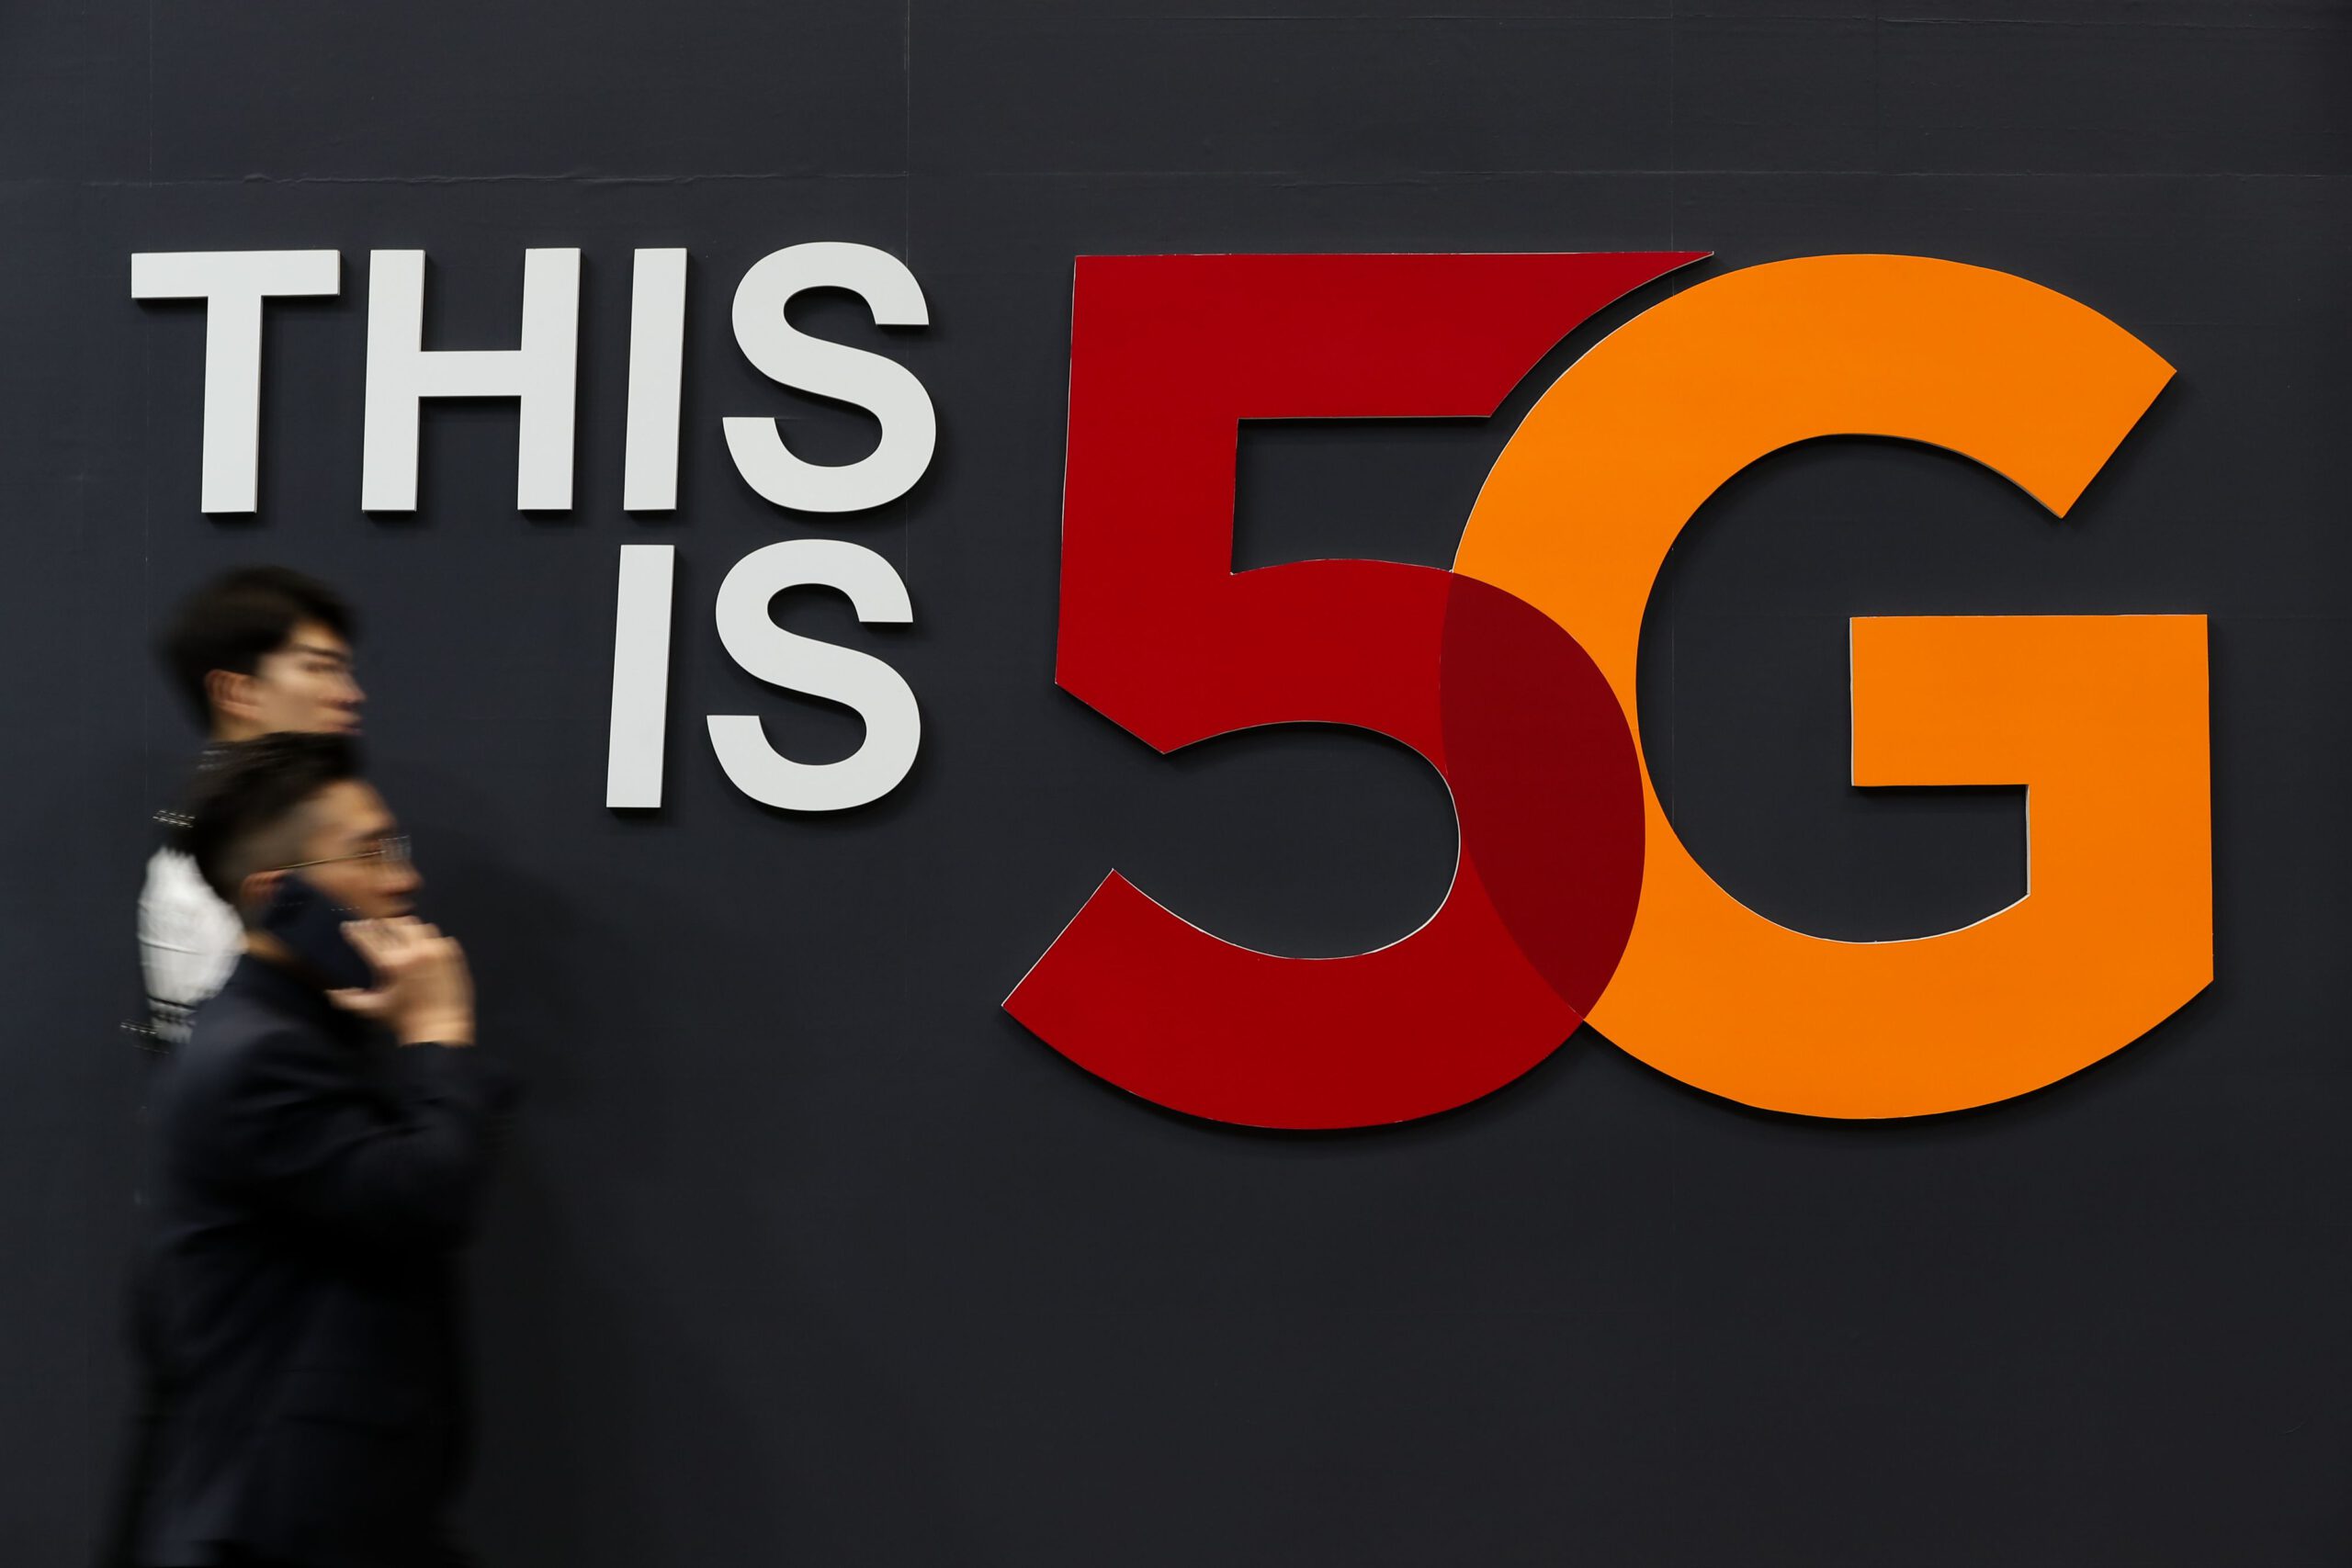 Singapore to roll out commercial 5G services by 2020